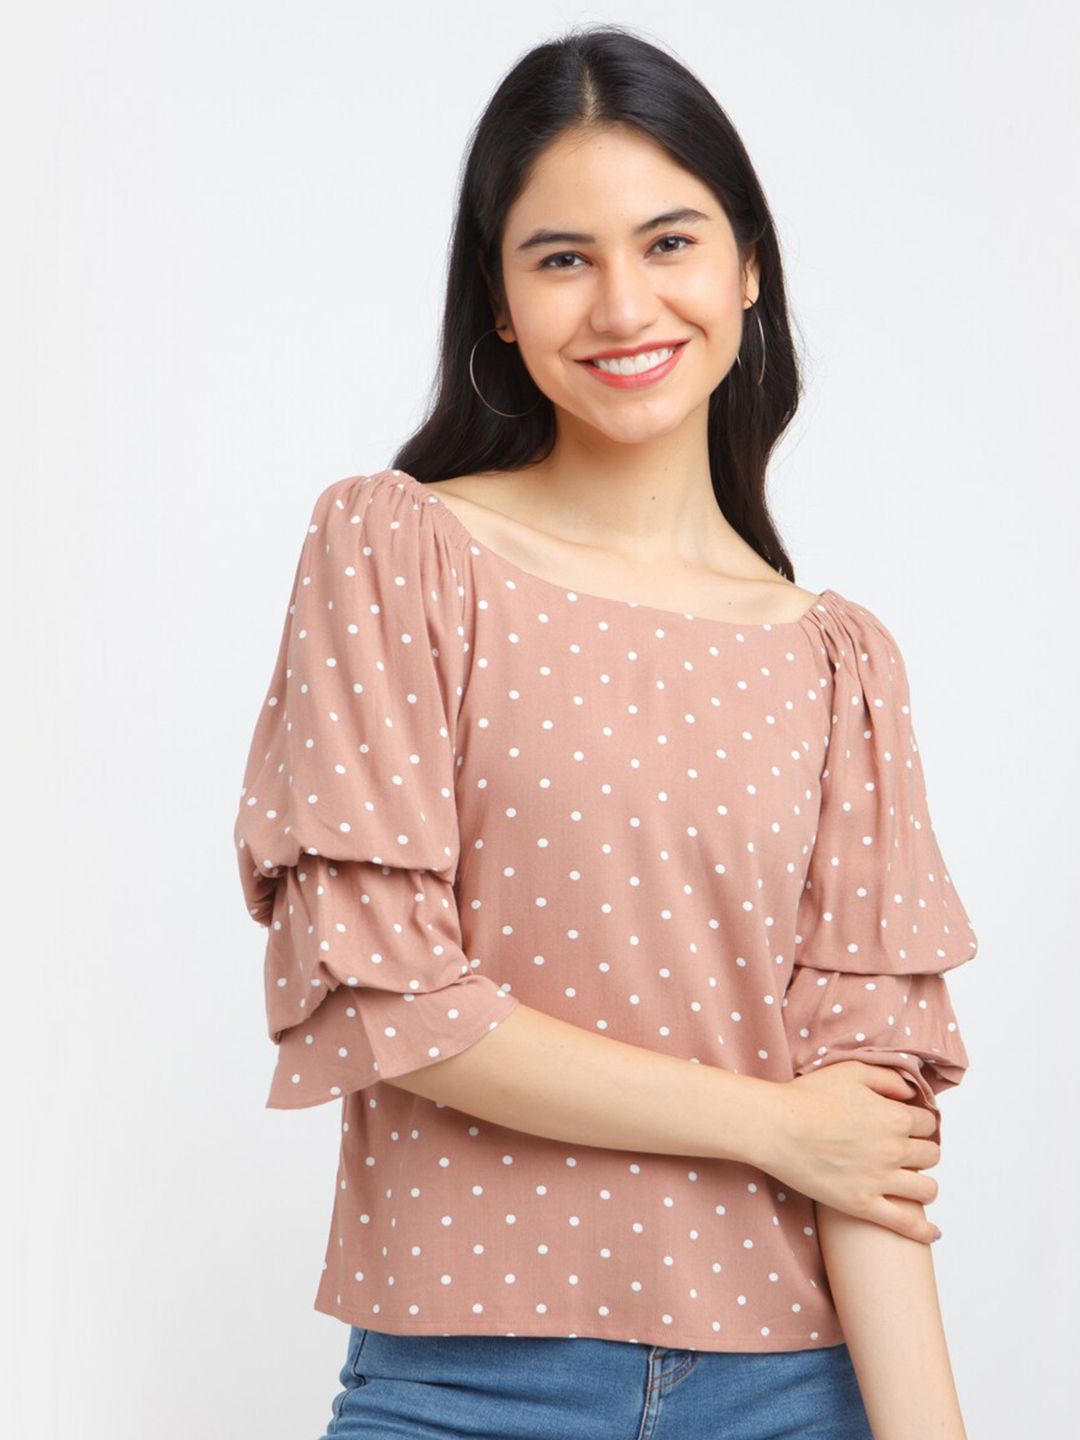 Zink London Women Nude-Coloured Print Top Price in India